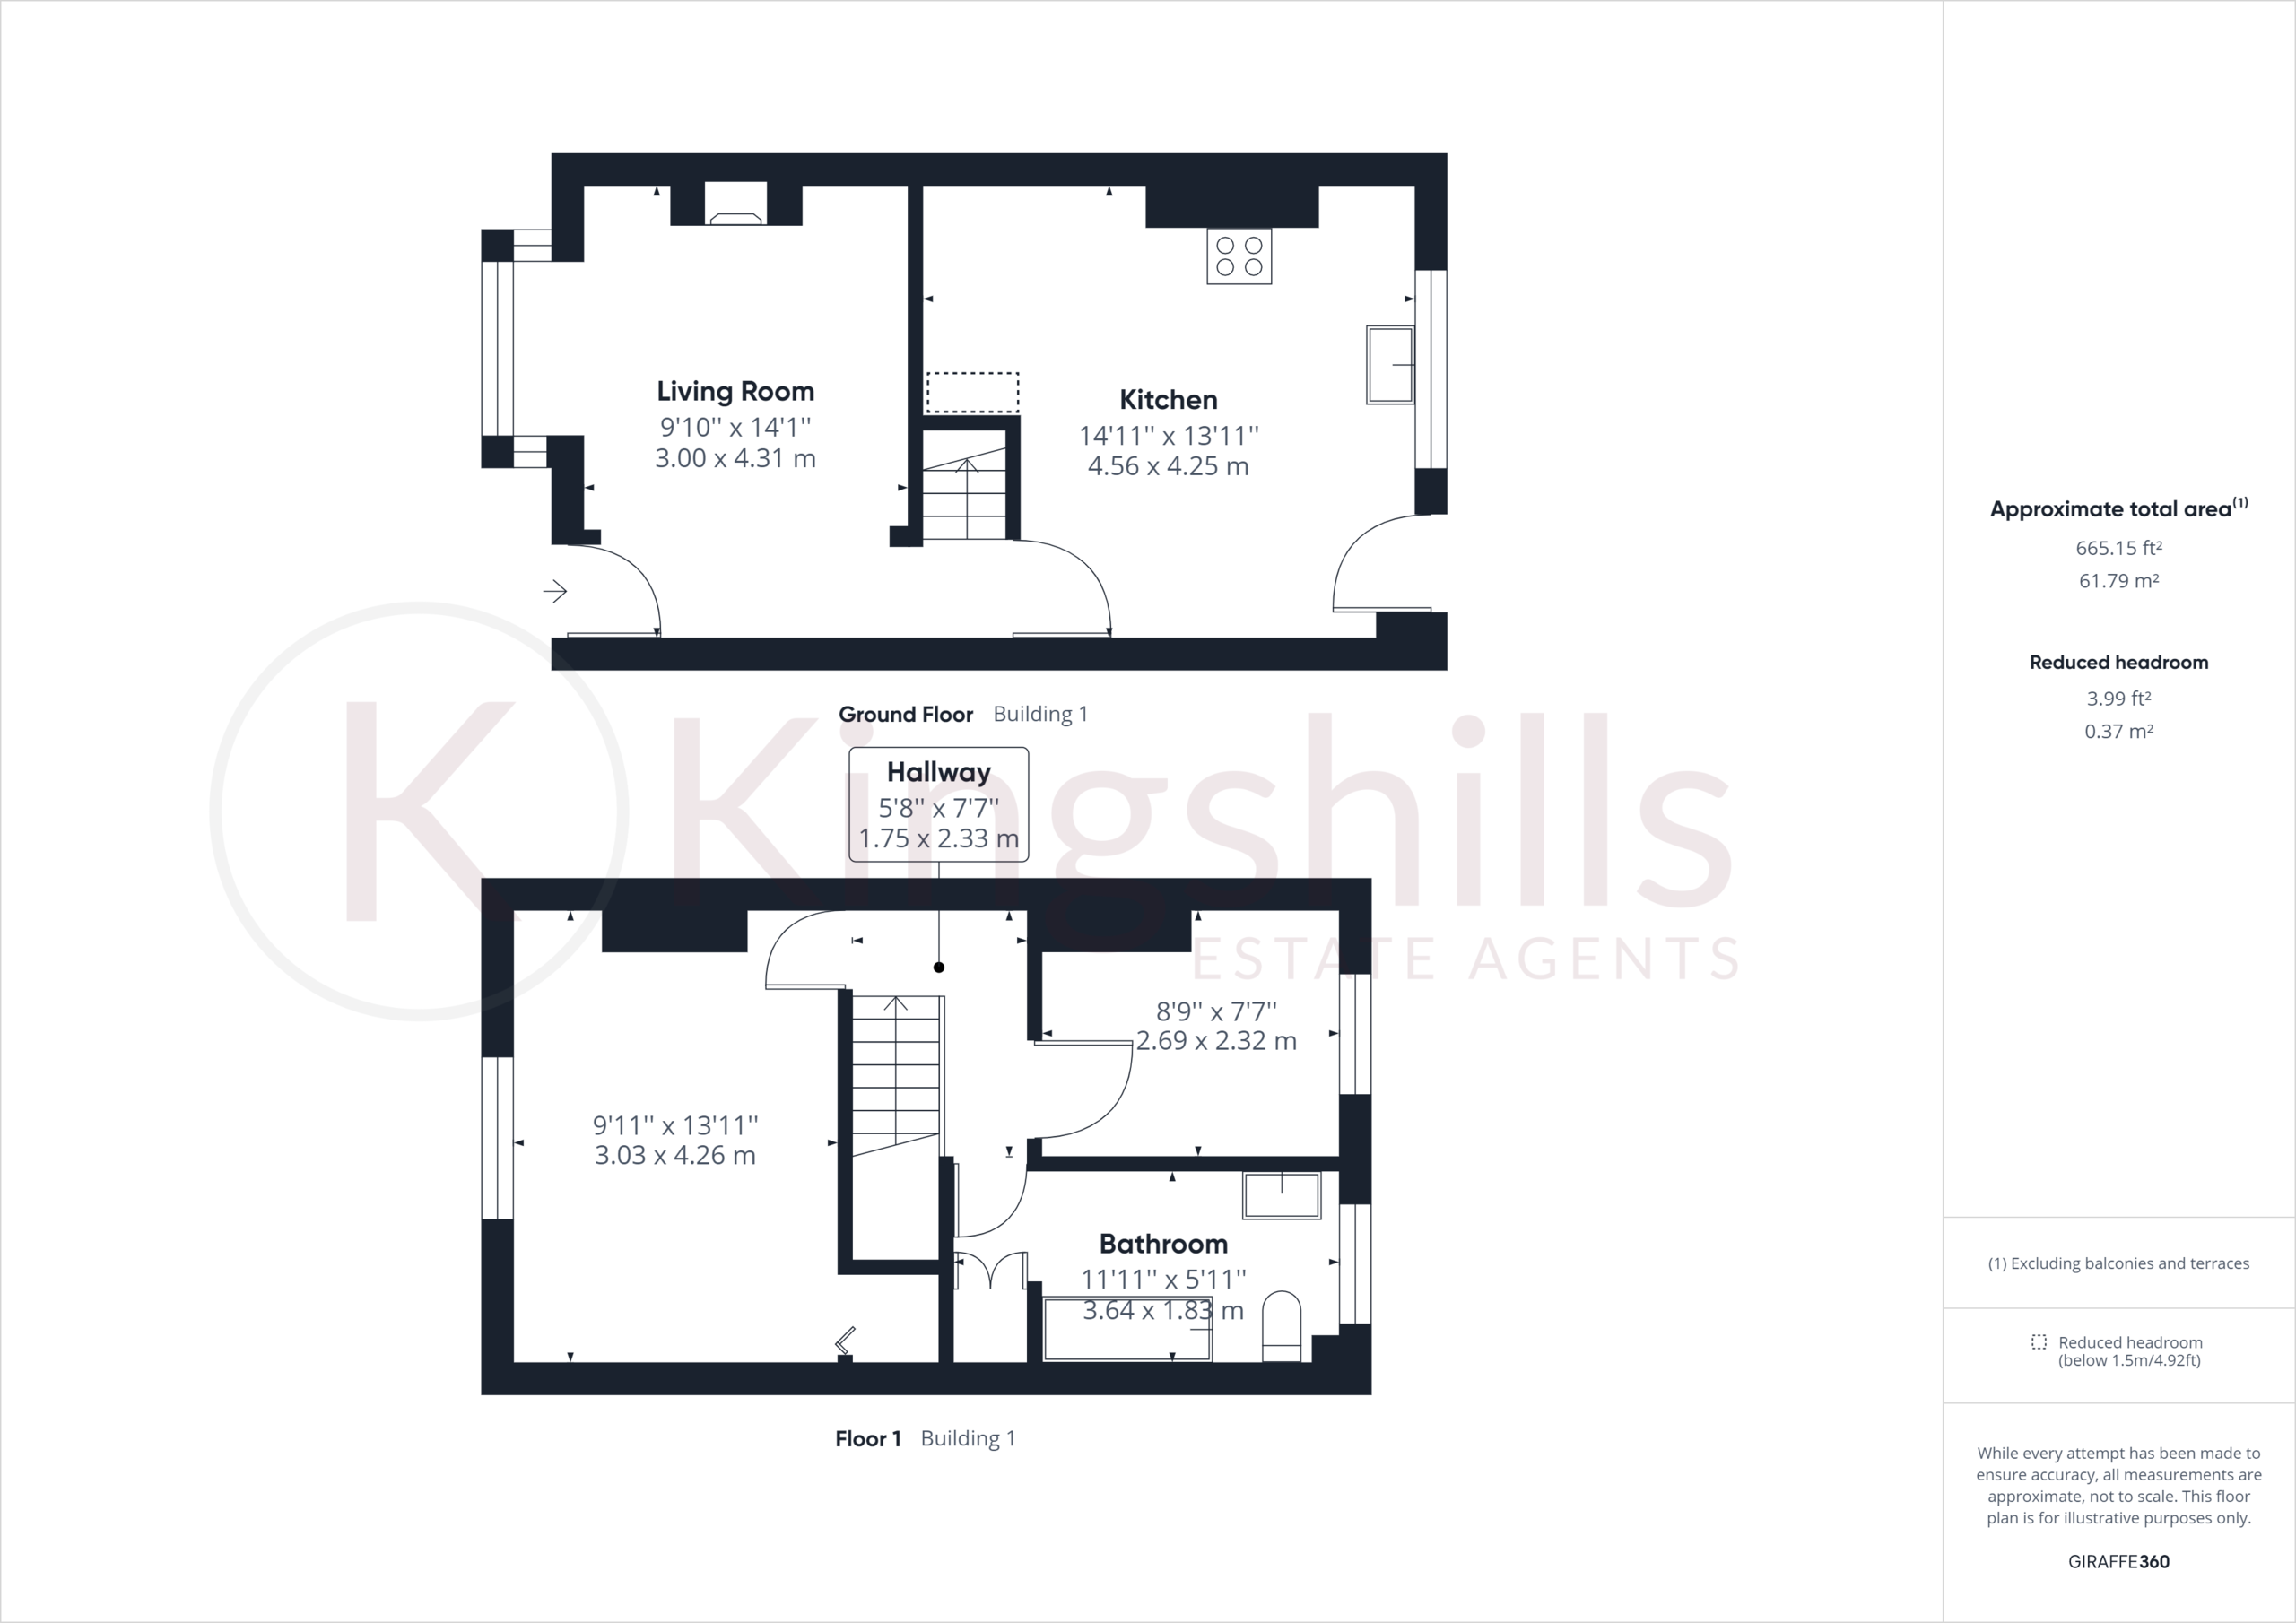 2 bed semi-detached house to rent in Sycamore Road, Chalfont St. Giles - Property floorplan